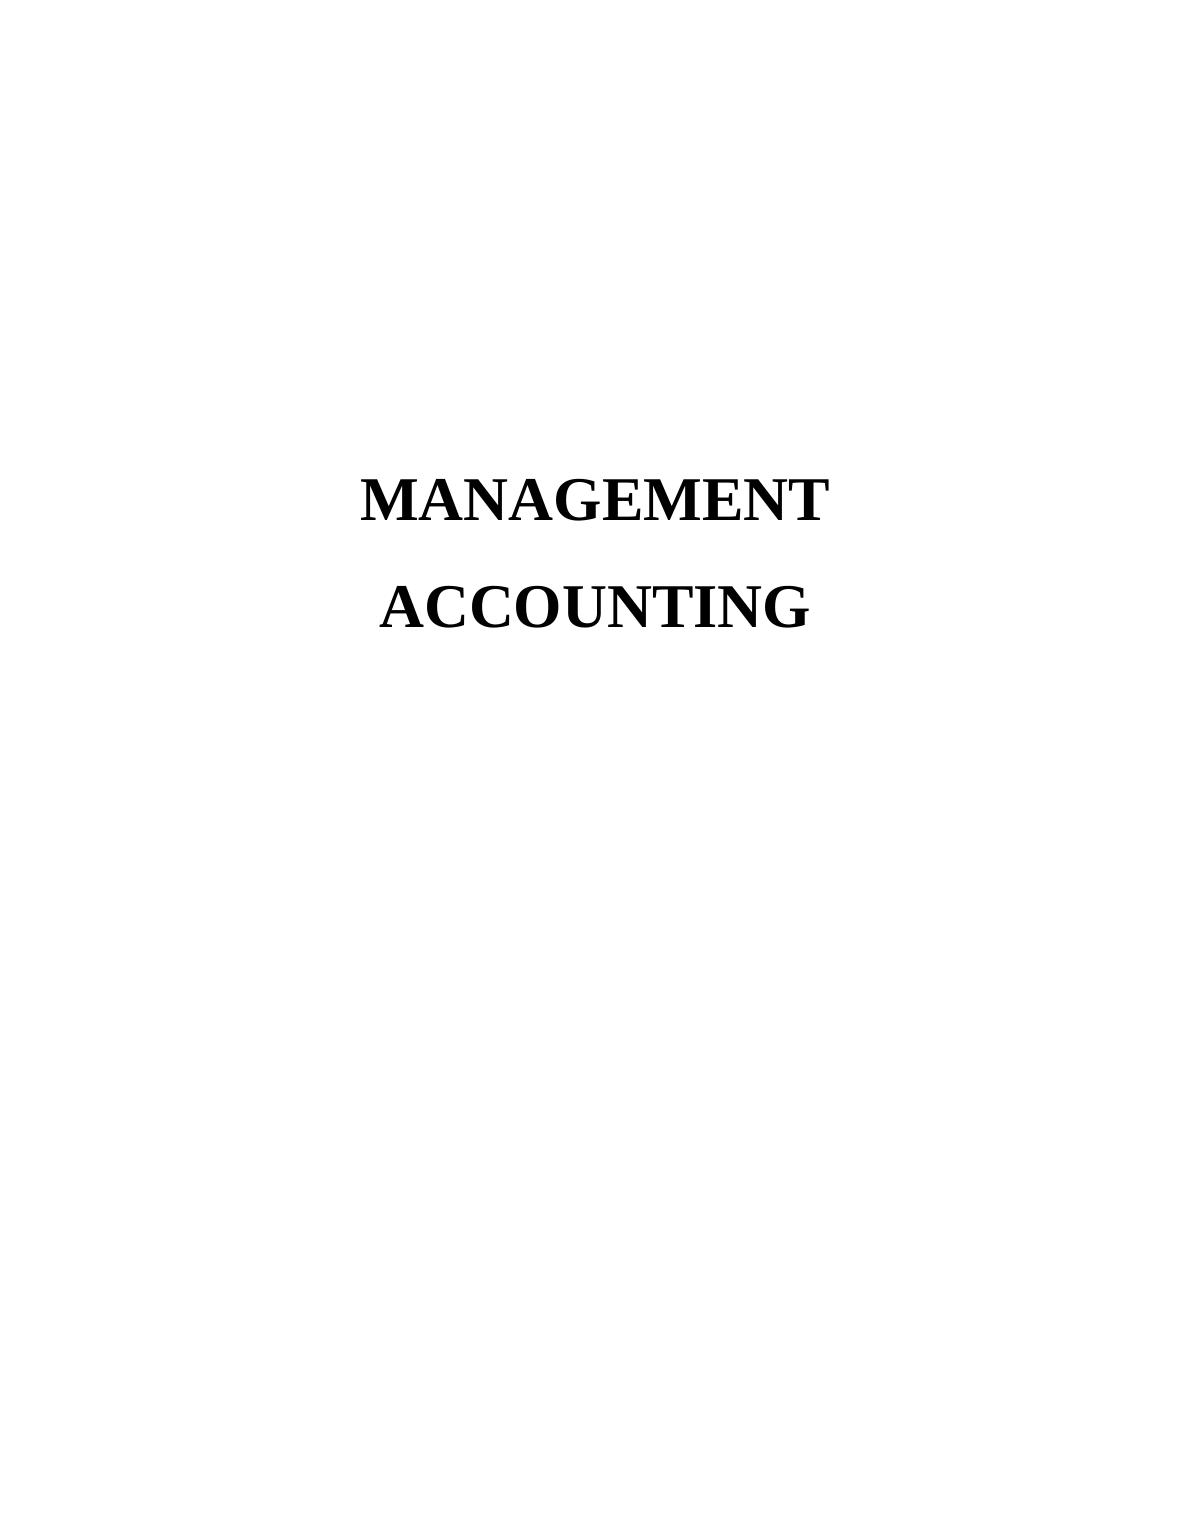 Management Accounting System of Unicorn_1